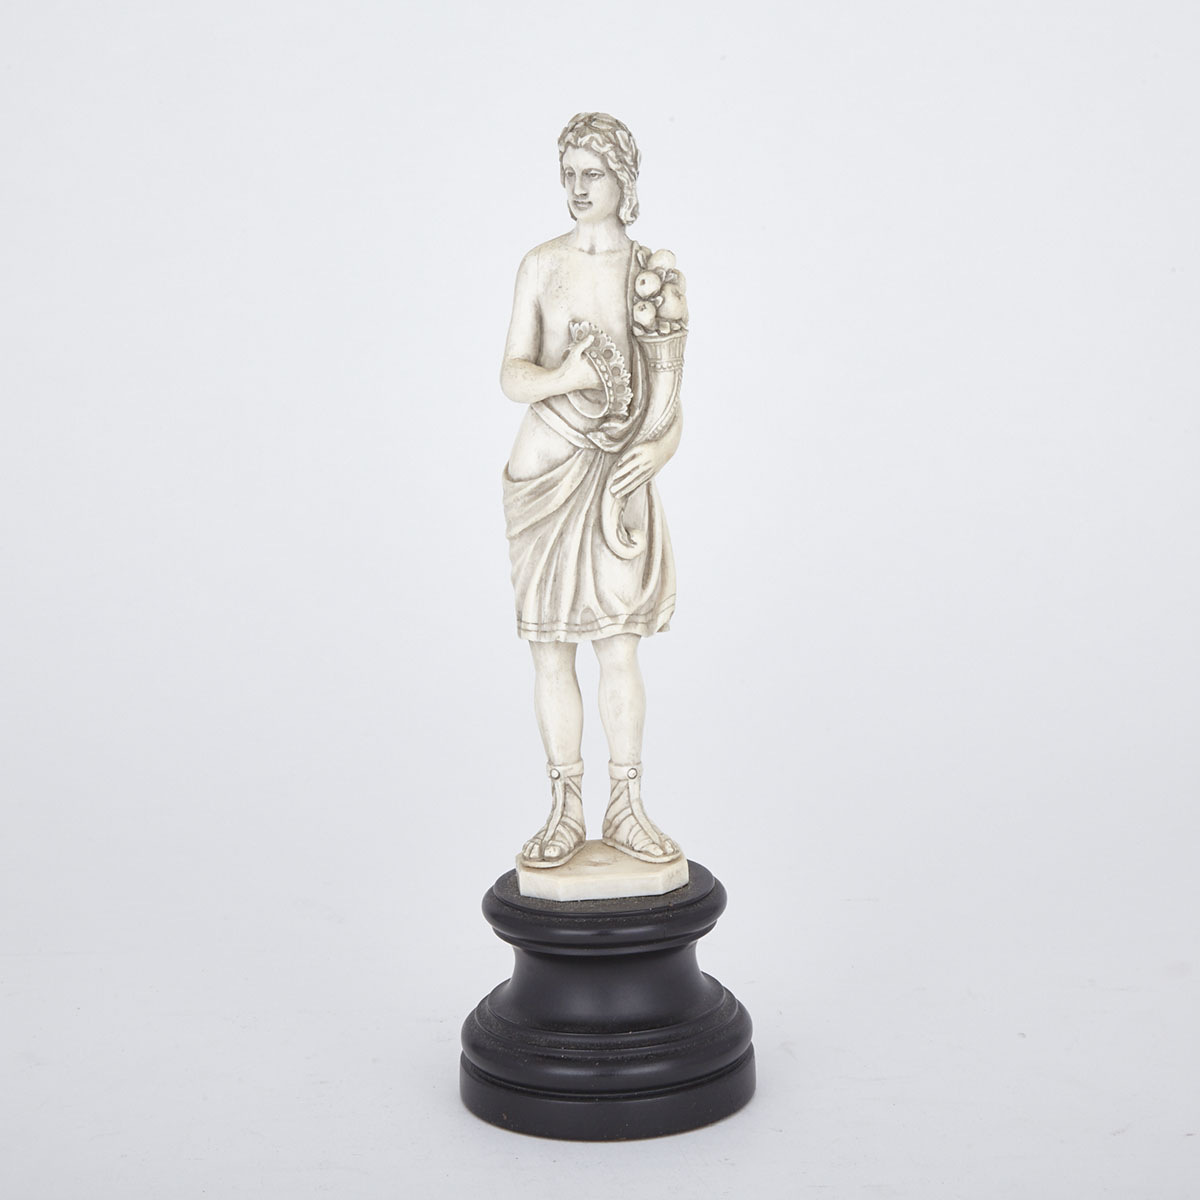 French Carved Ivory Figure of a Classical Young Man with Cornucopia and Crown, mid 20th century